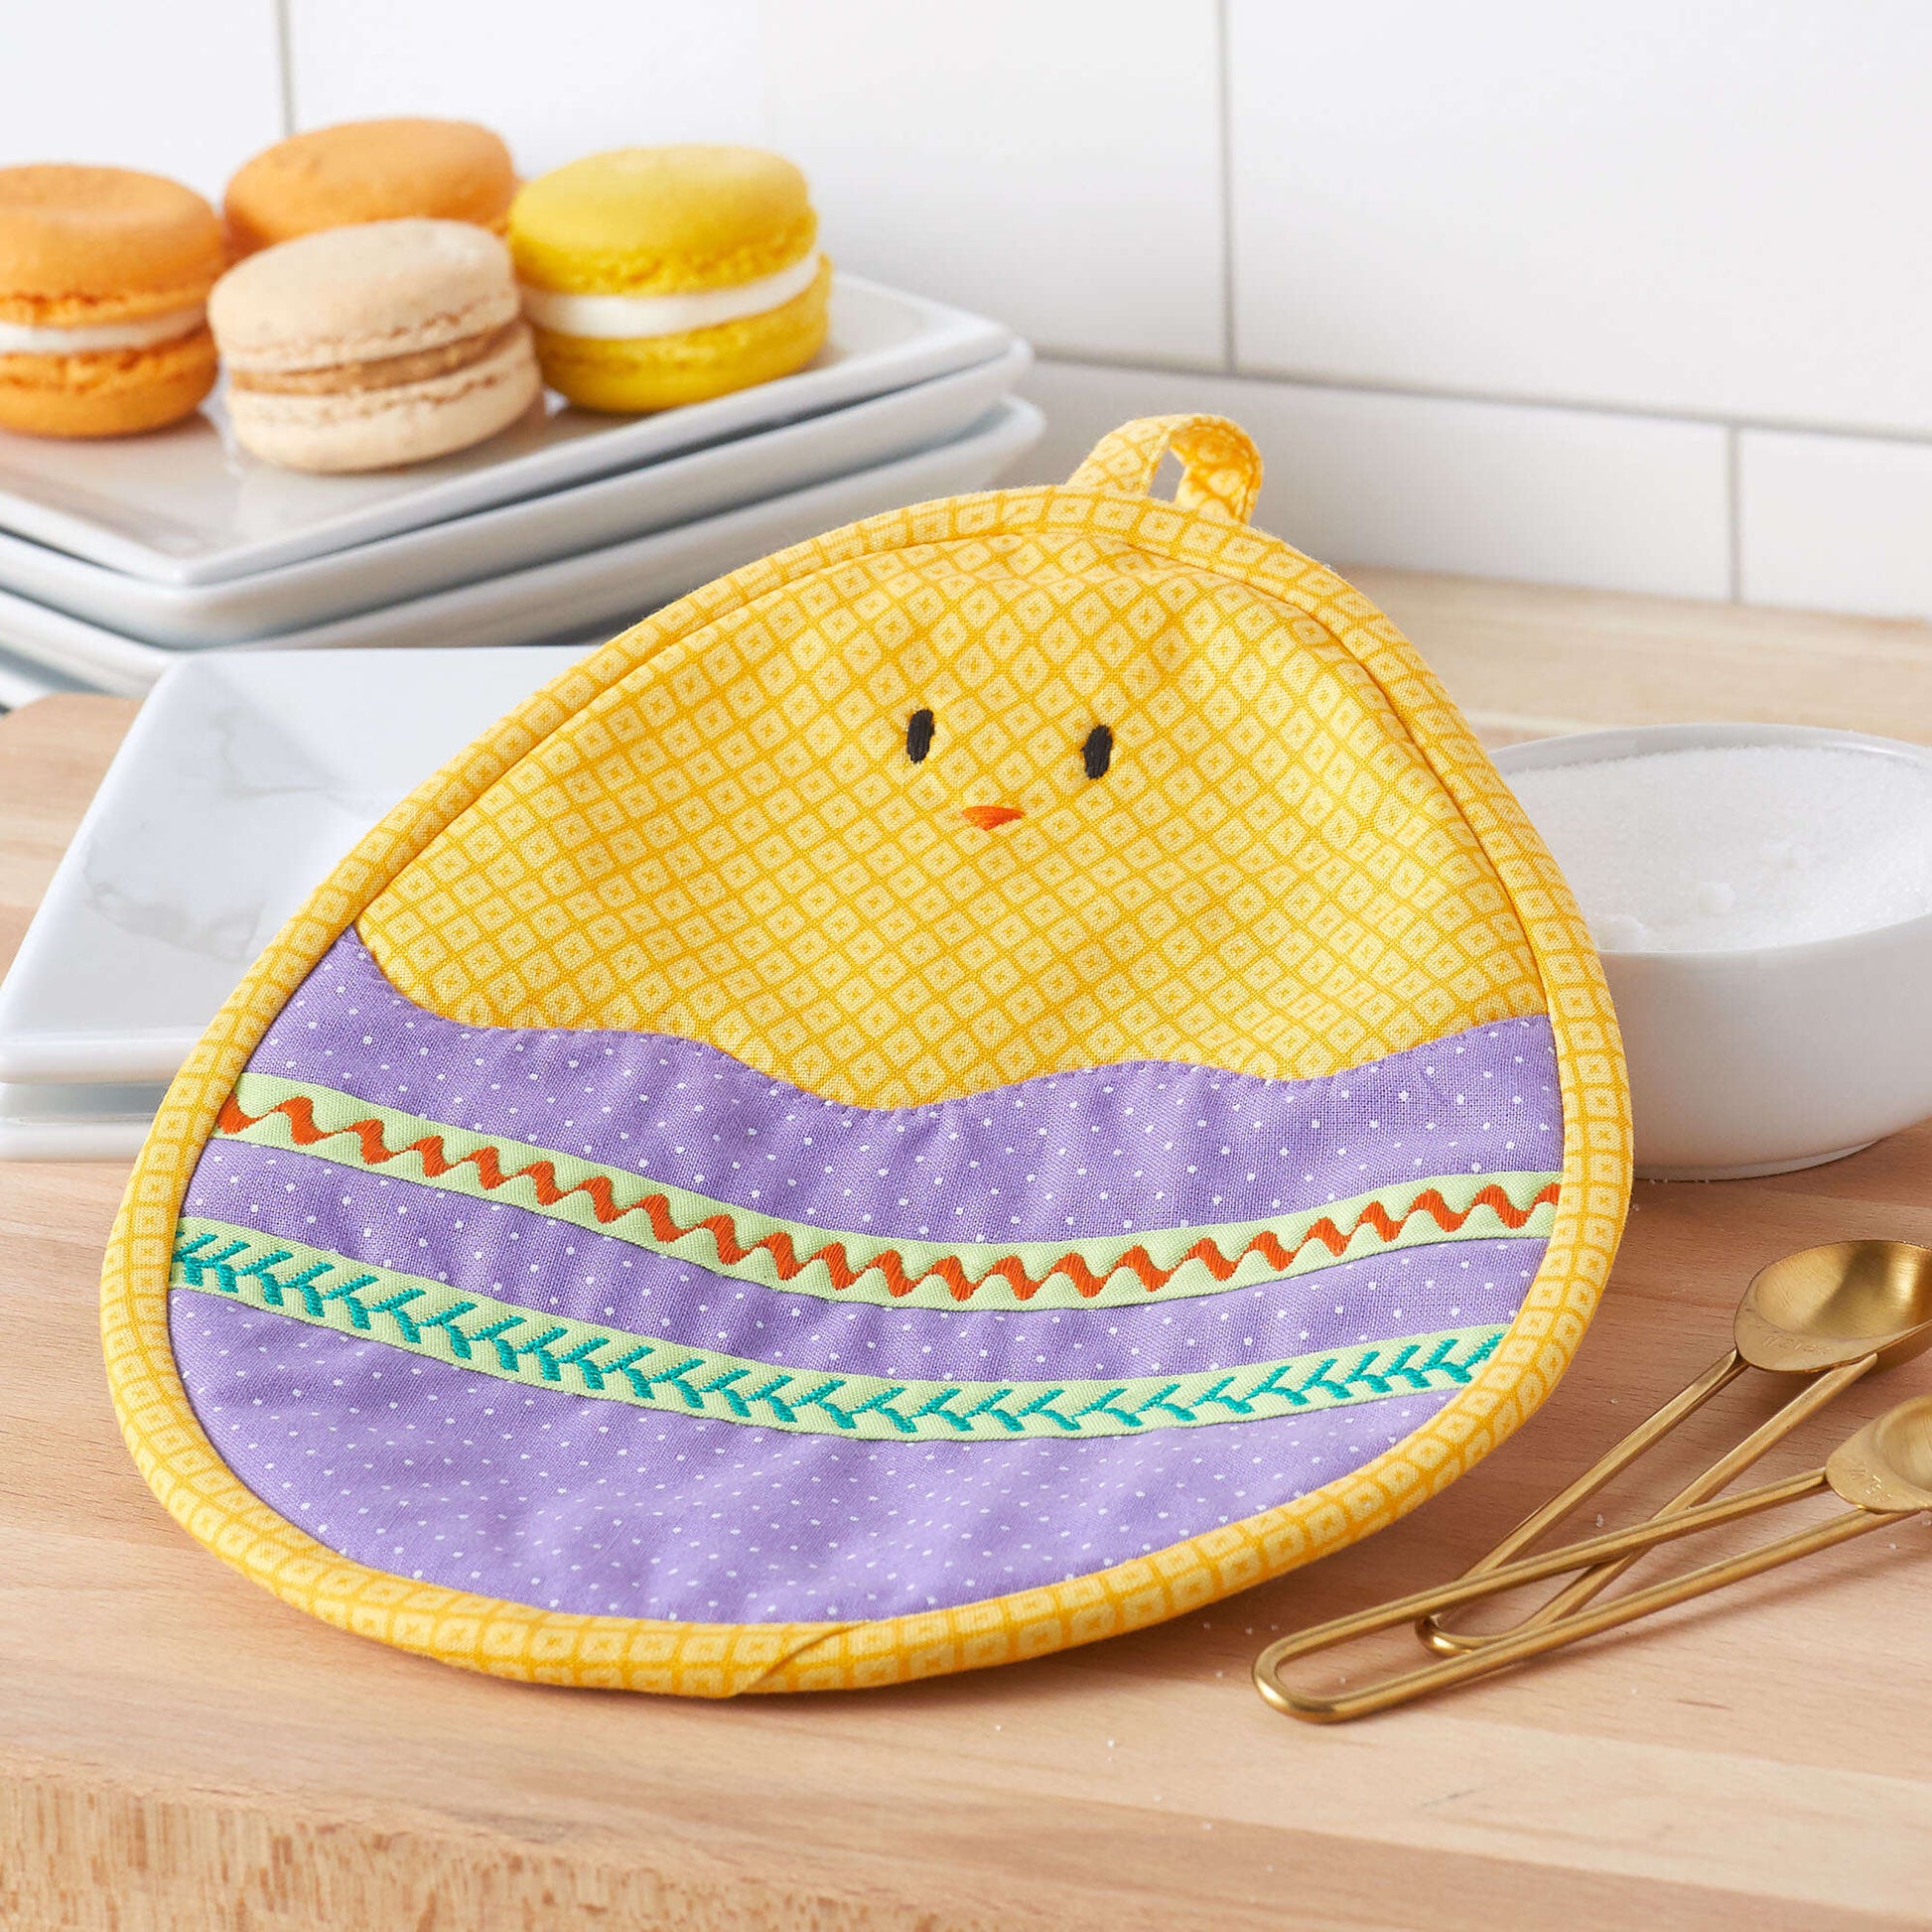 Free Coats & Clark One Hot Chick Pot Holder Sewing Pattern